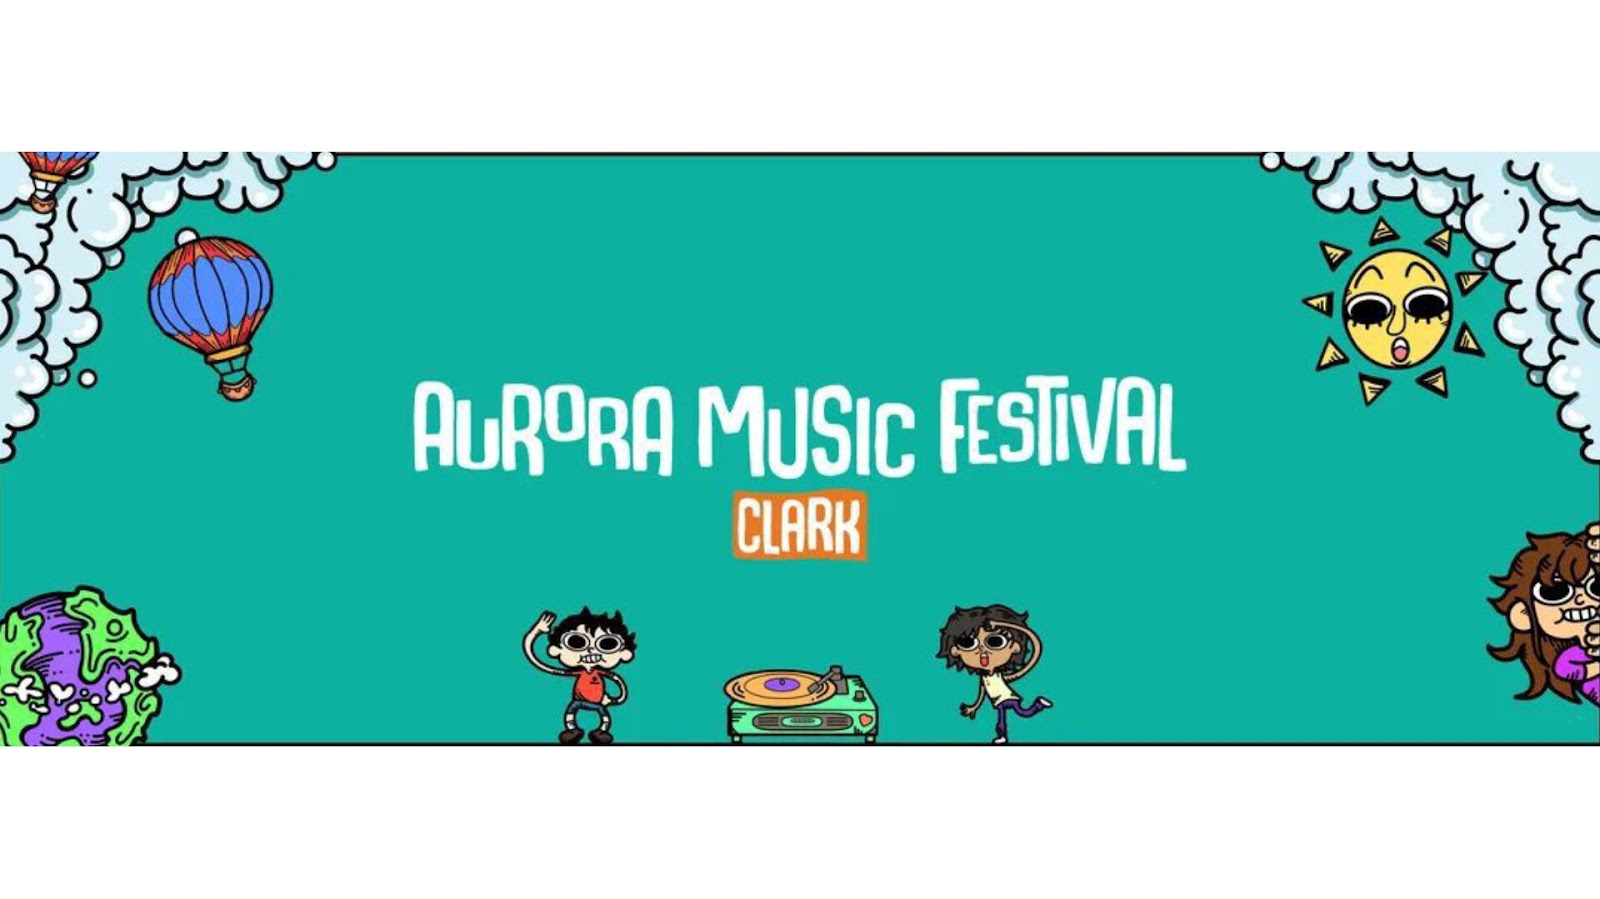 Aurora Music Festival Clark 2024 Promises To Be Bigger, Reveals Massive Two-Day Lineup!